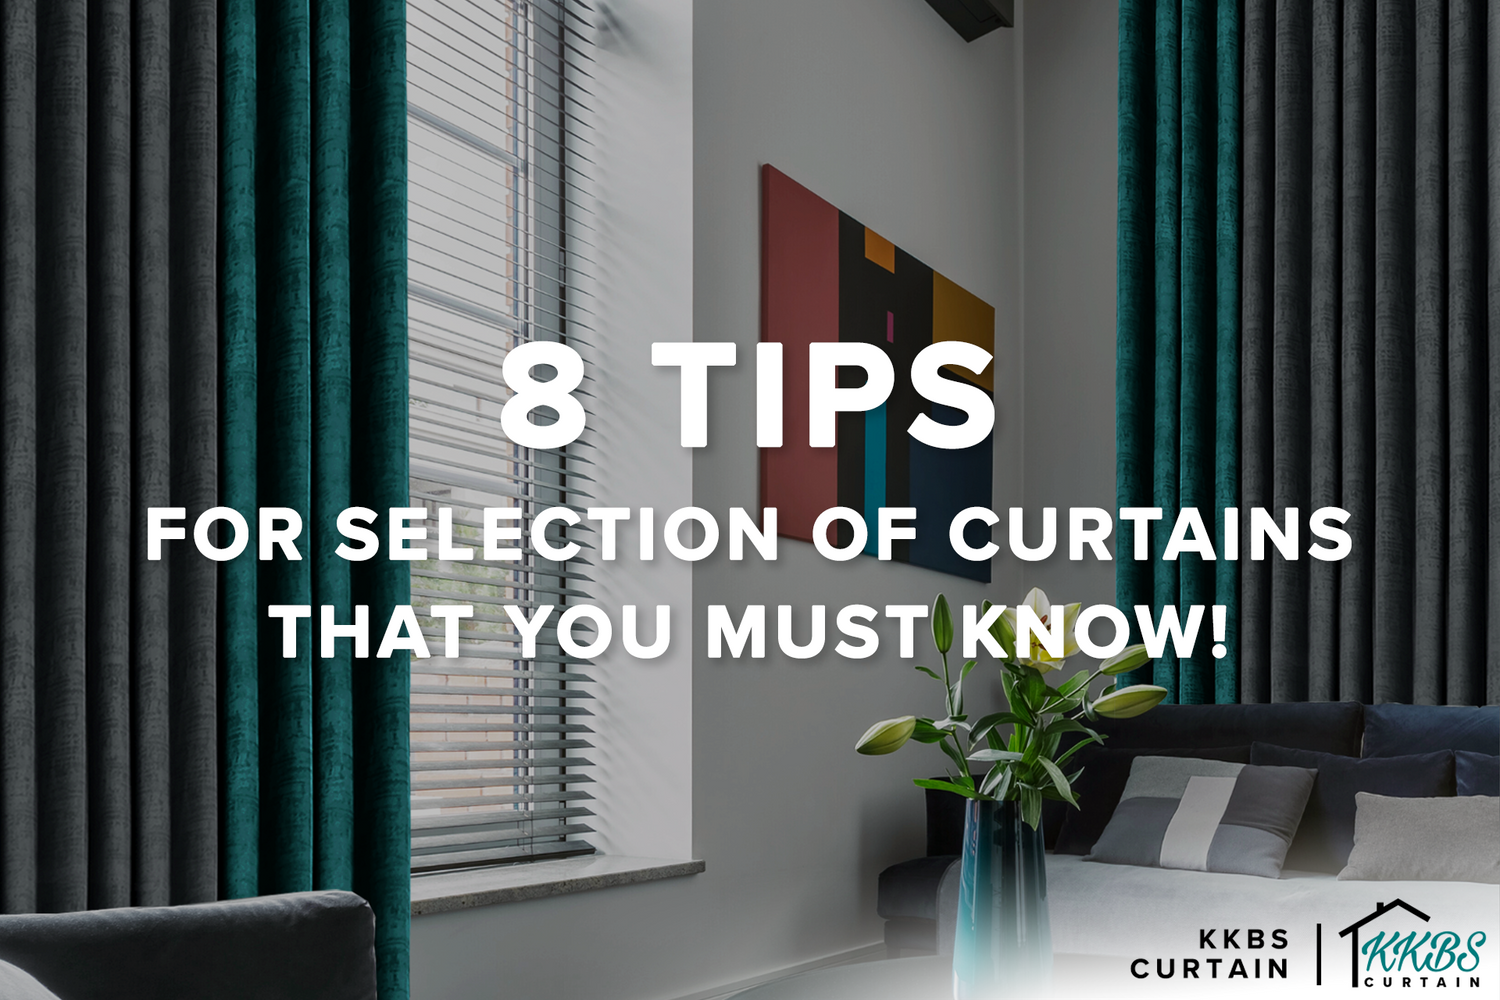 8-tips-for-selection-of-curtains-that-you-must-know